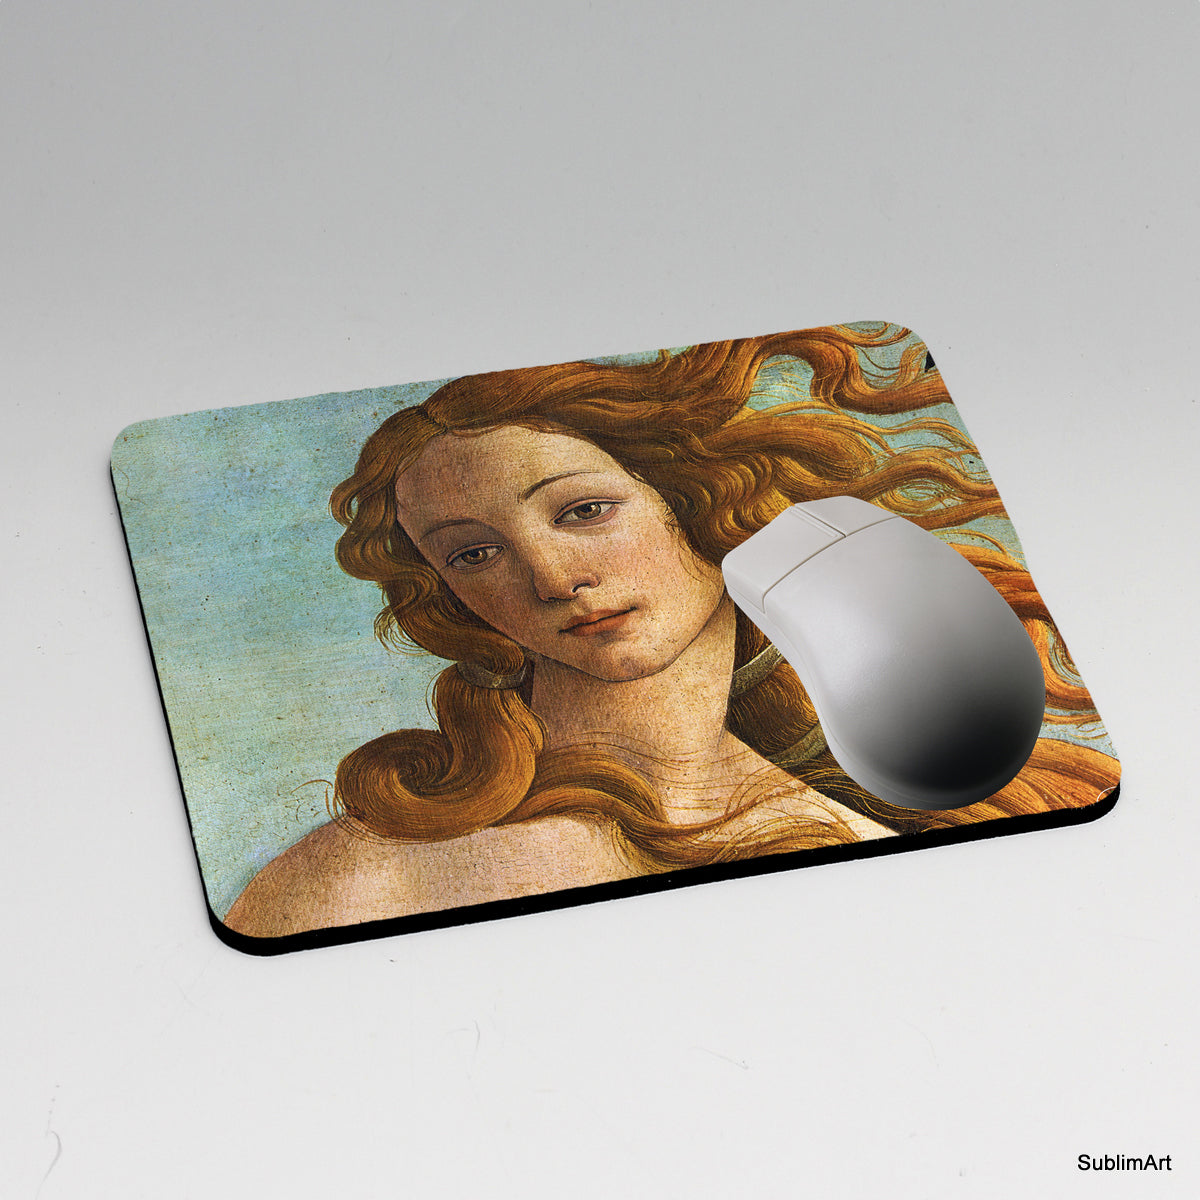 MOUSE PAD: The Birth of Venus by Sandro Botticelli (Detail)